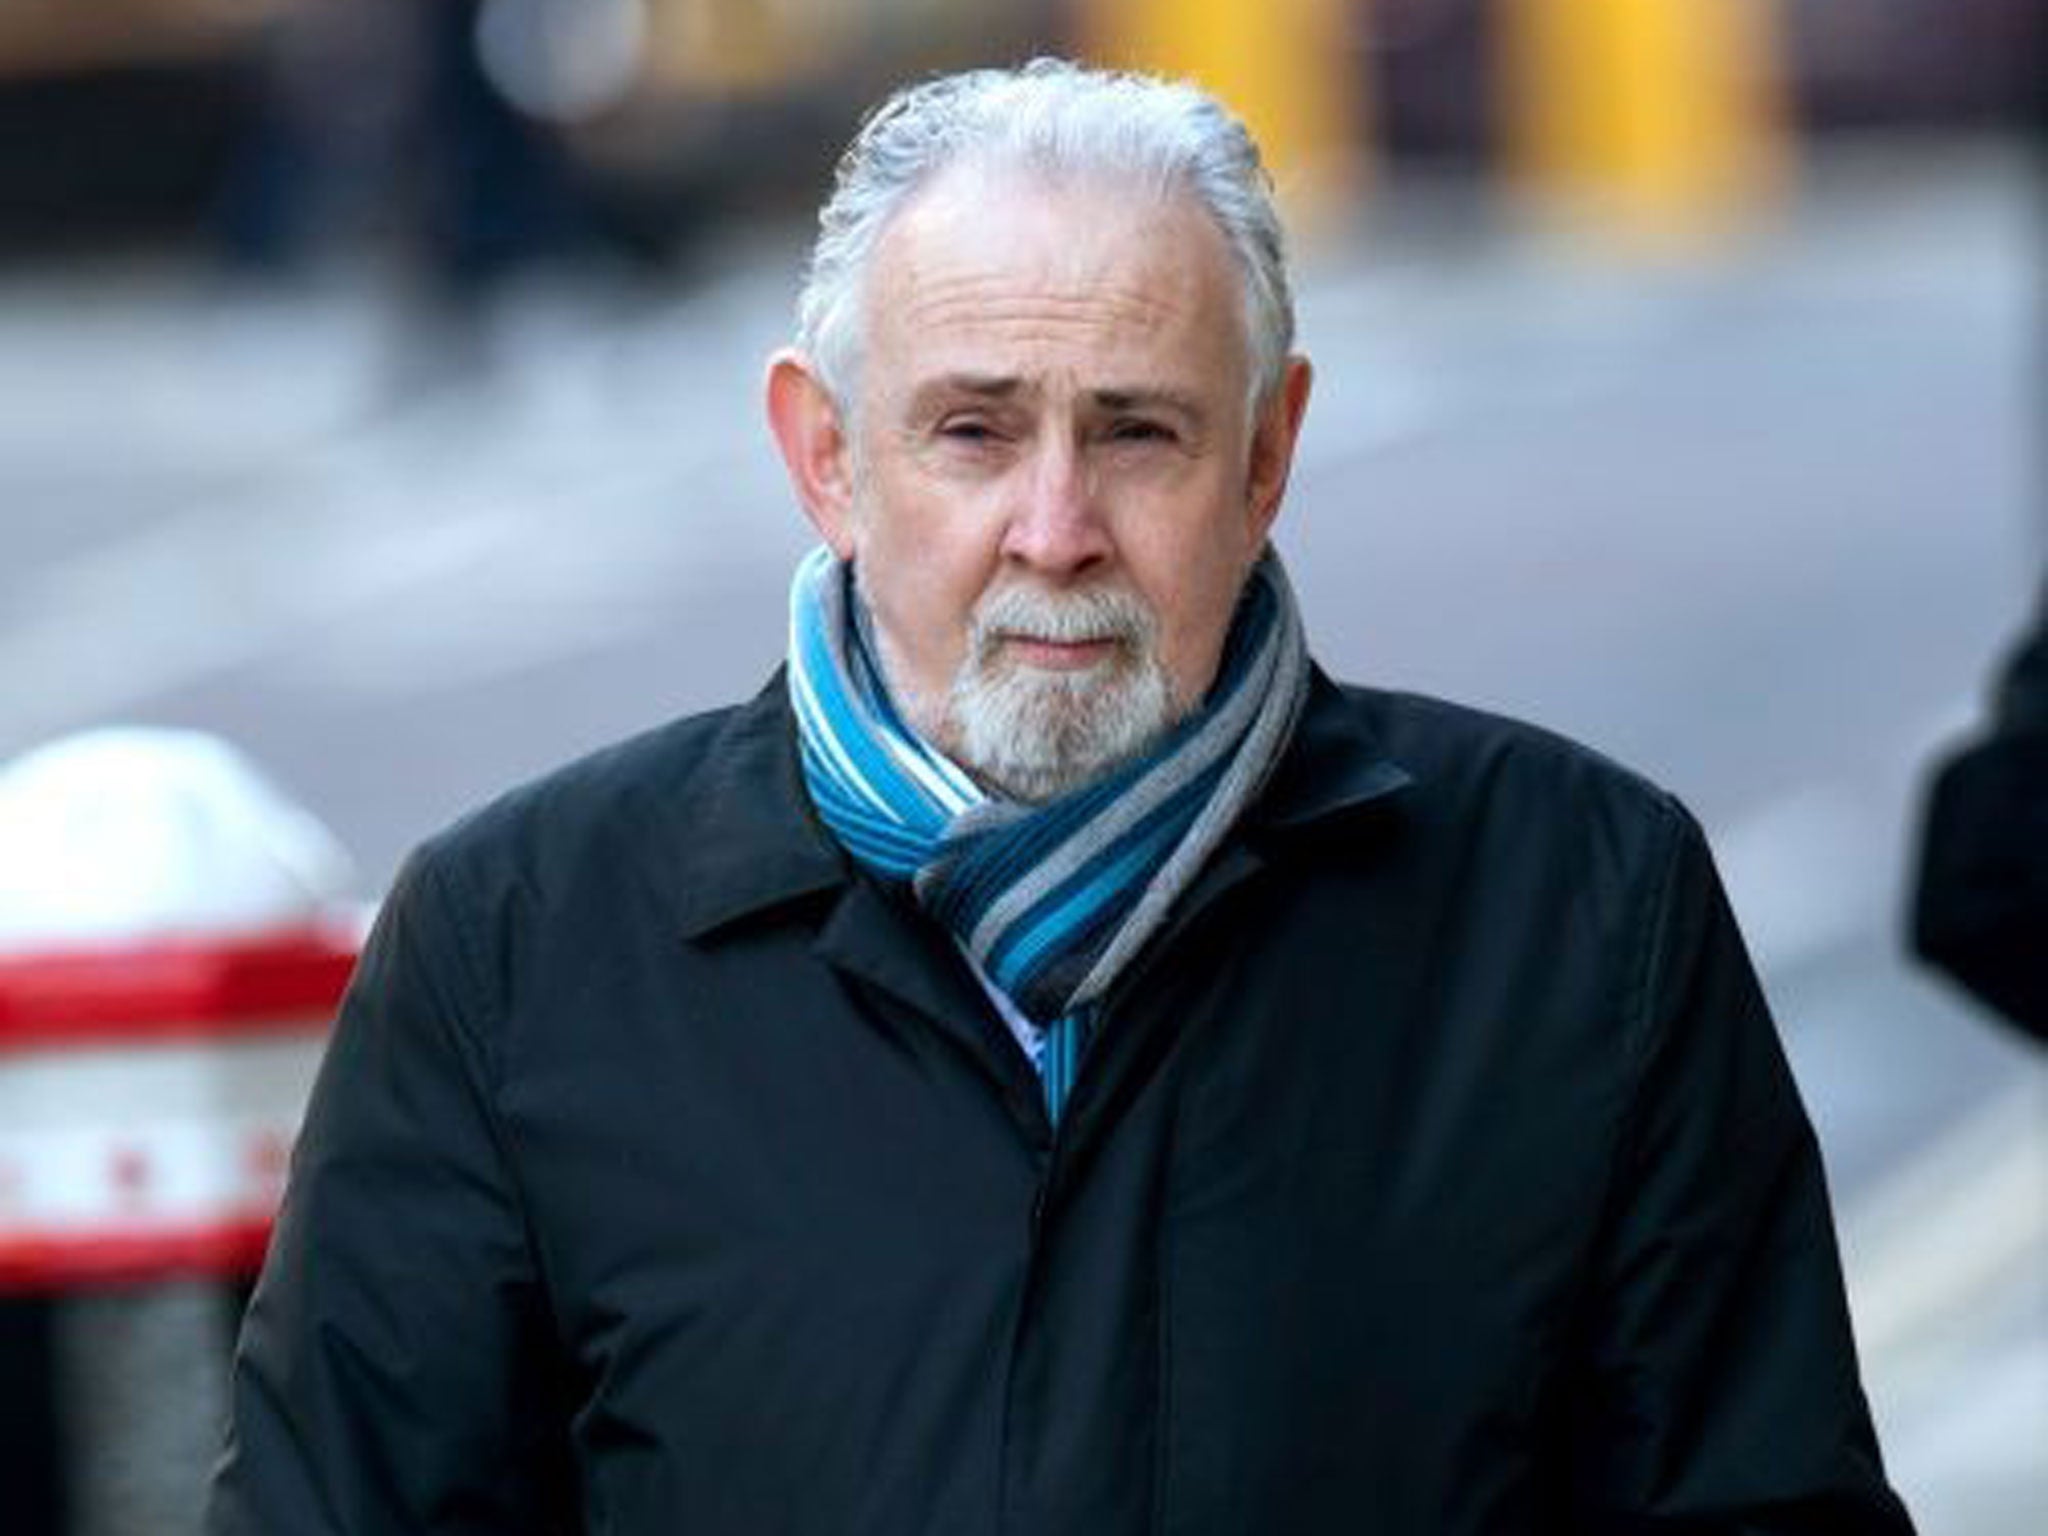 John Downey is to face extradition proceedings